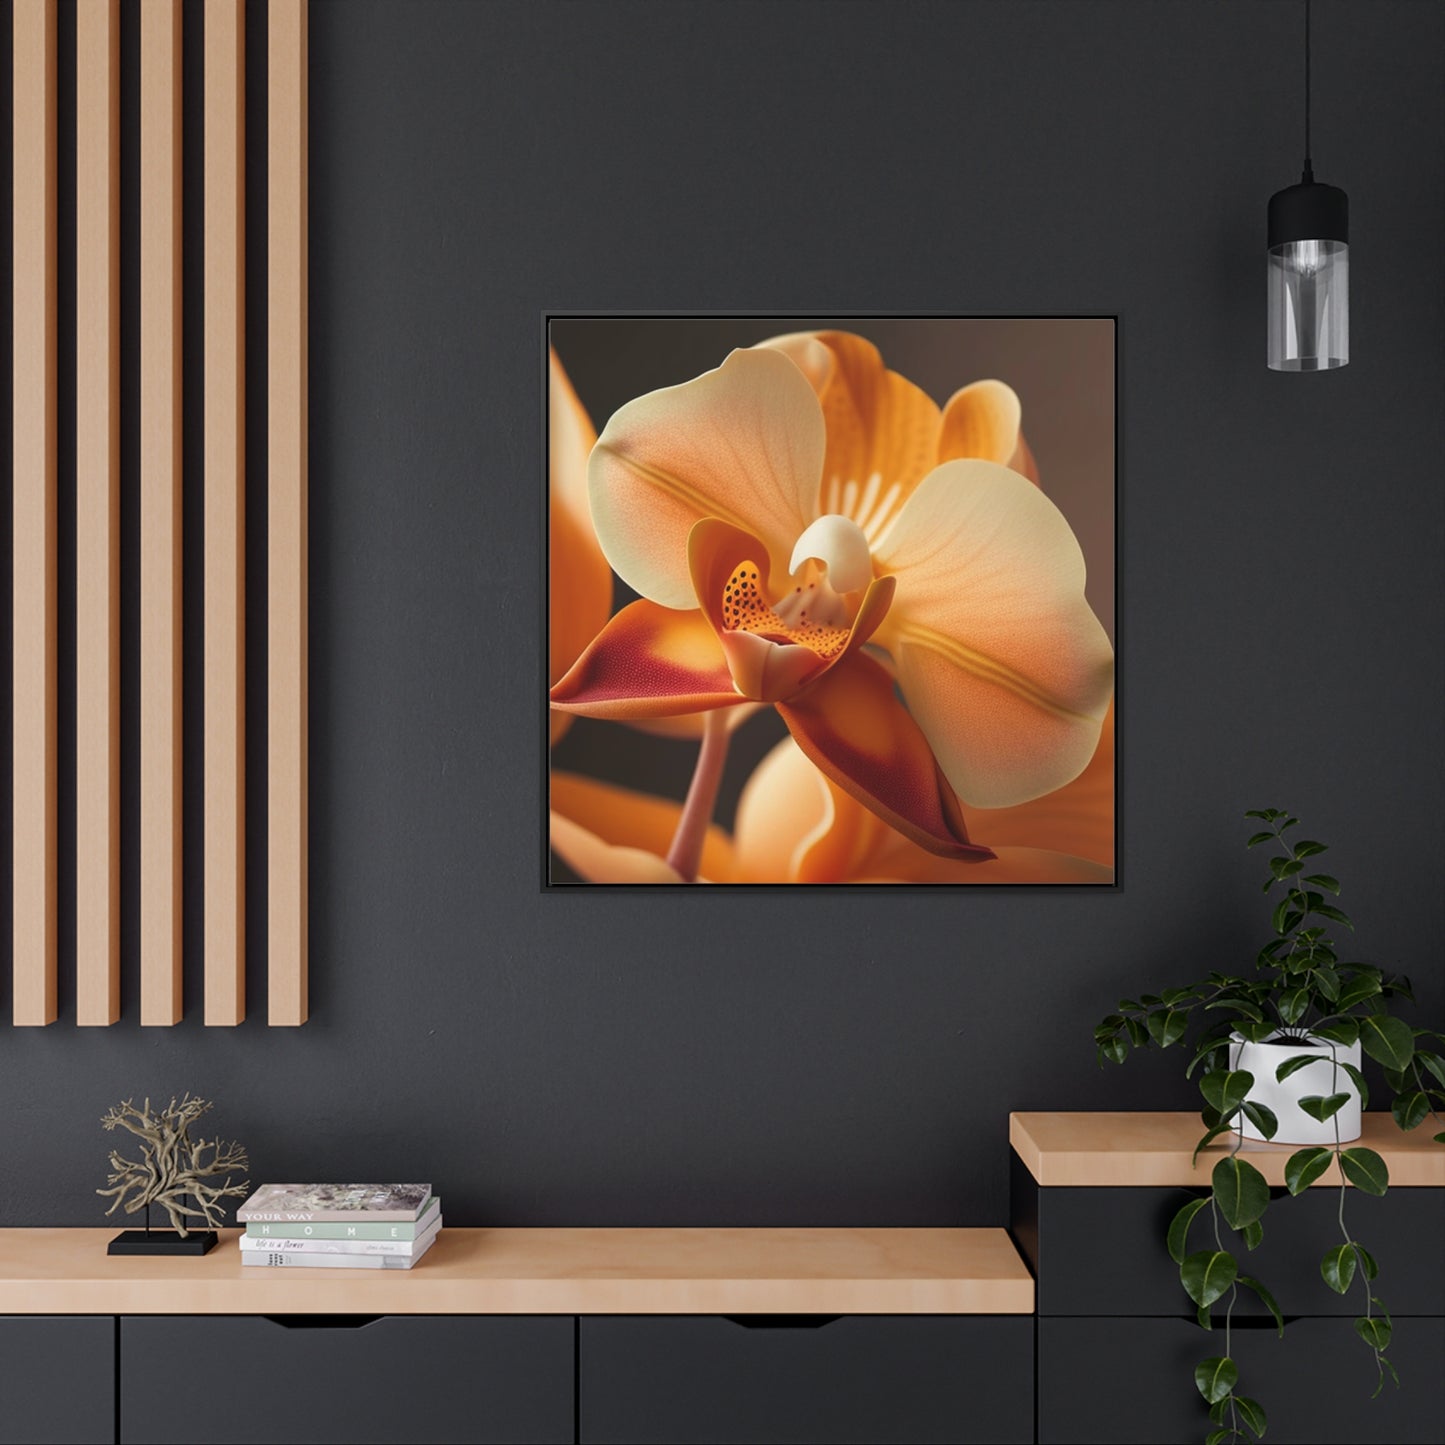 Gallery Canvas Wraps, Square Frame Orange Orchid 3